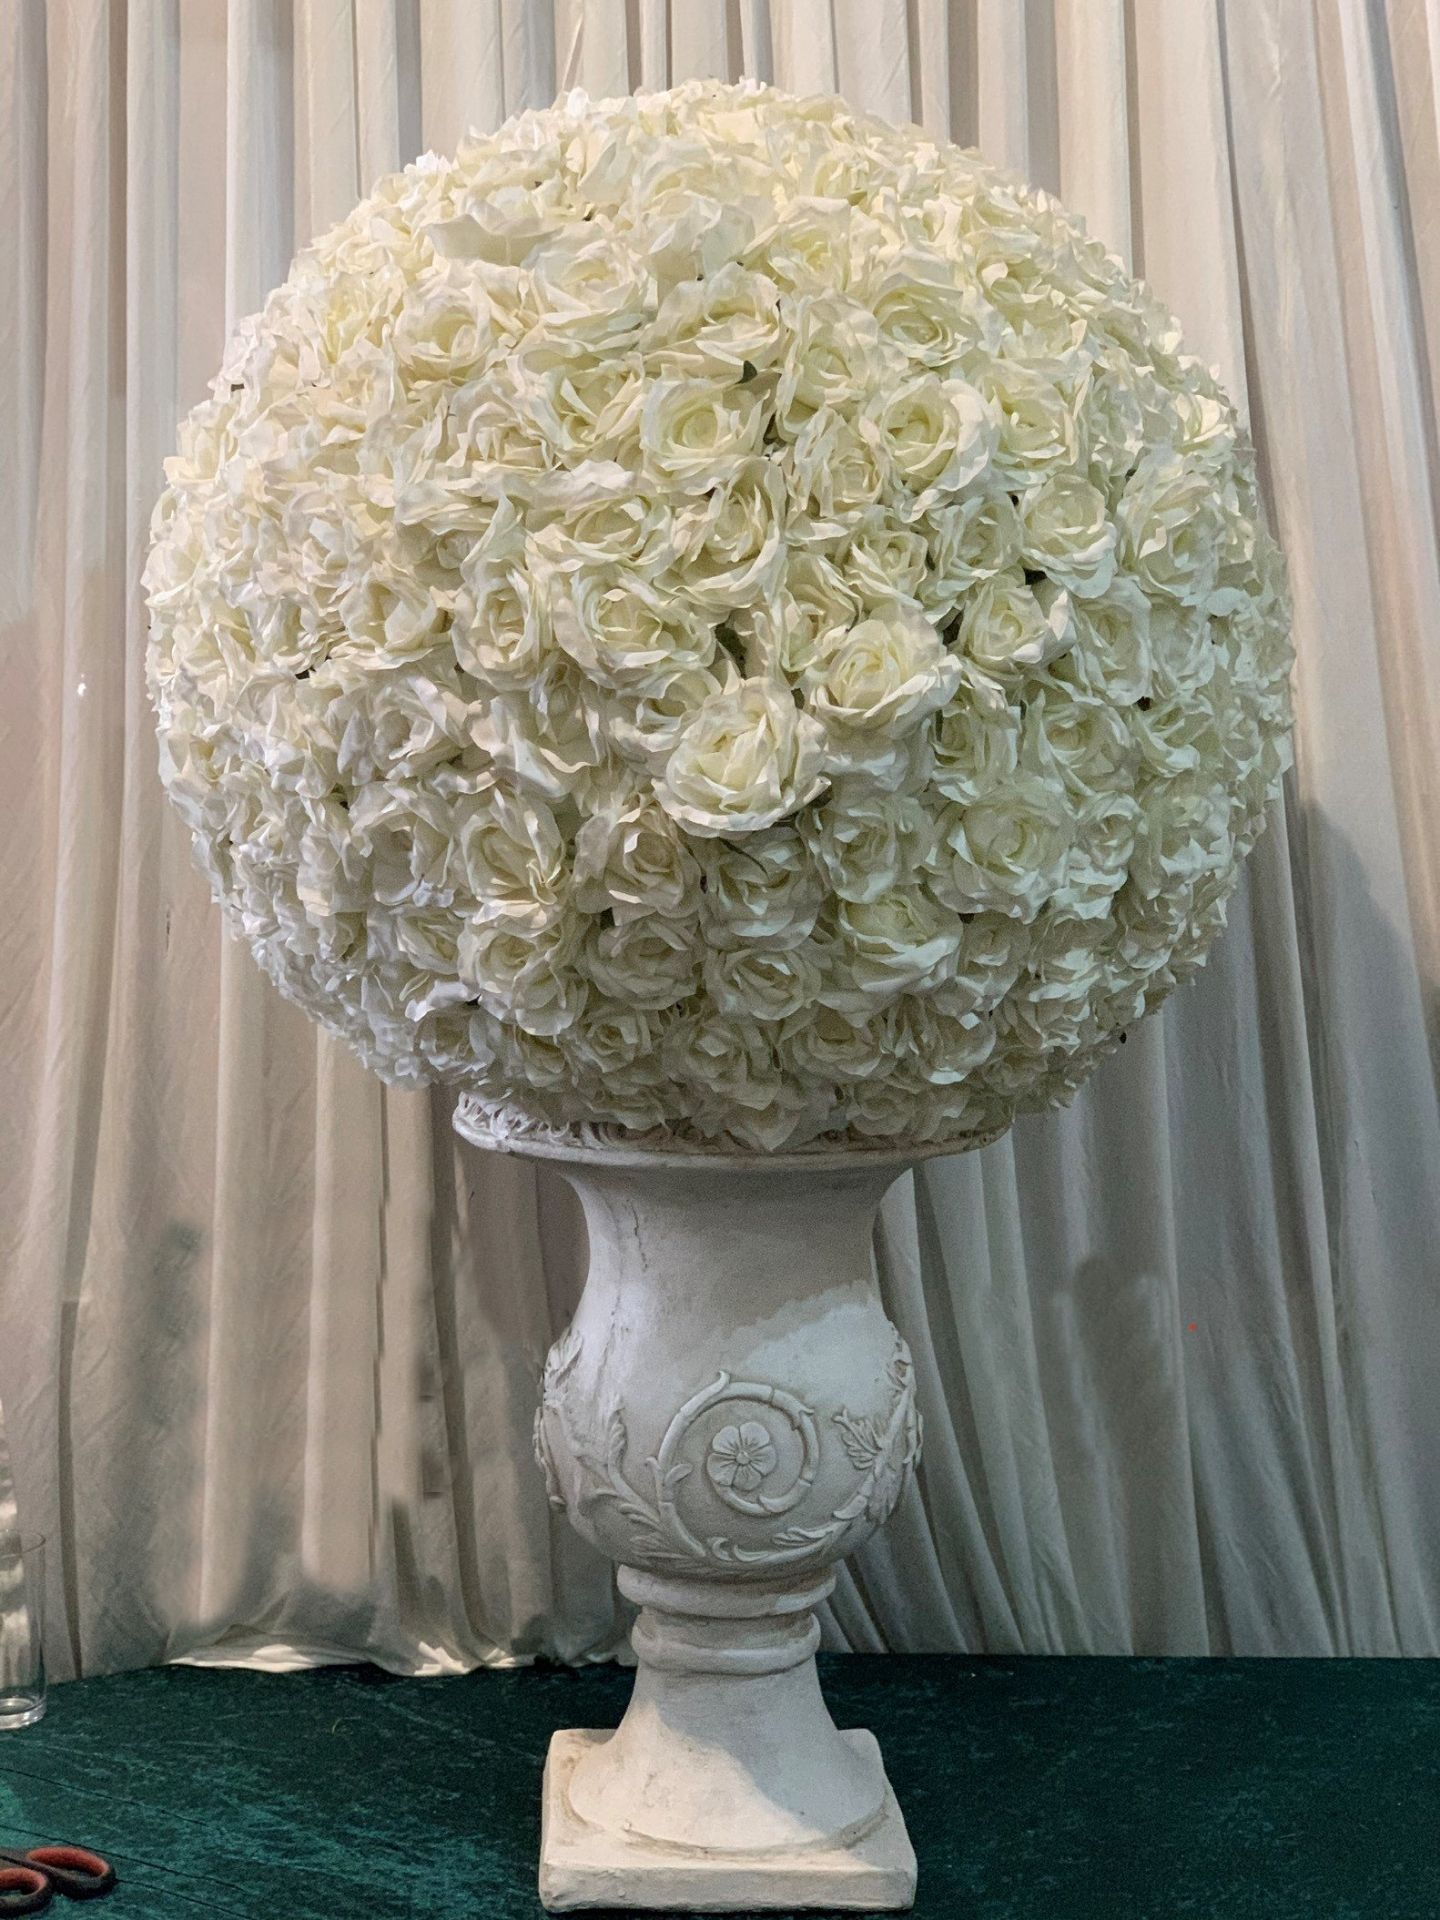 2 x White Rose Ball Statements - Vase NOT Included - Dimensions: 65cm - Ref: Lot 70 - CL548 -